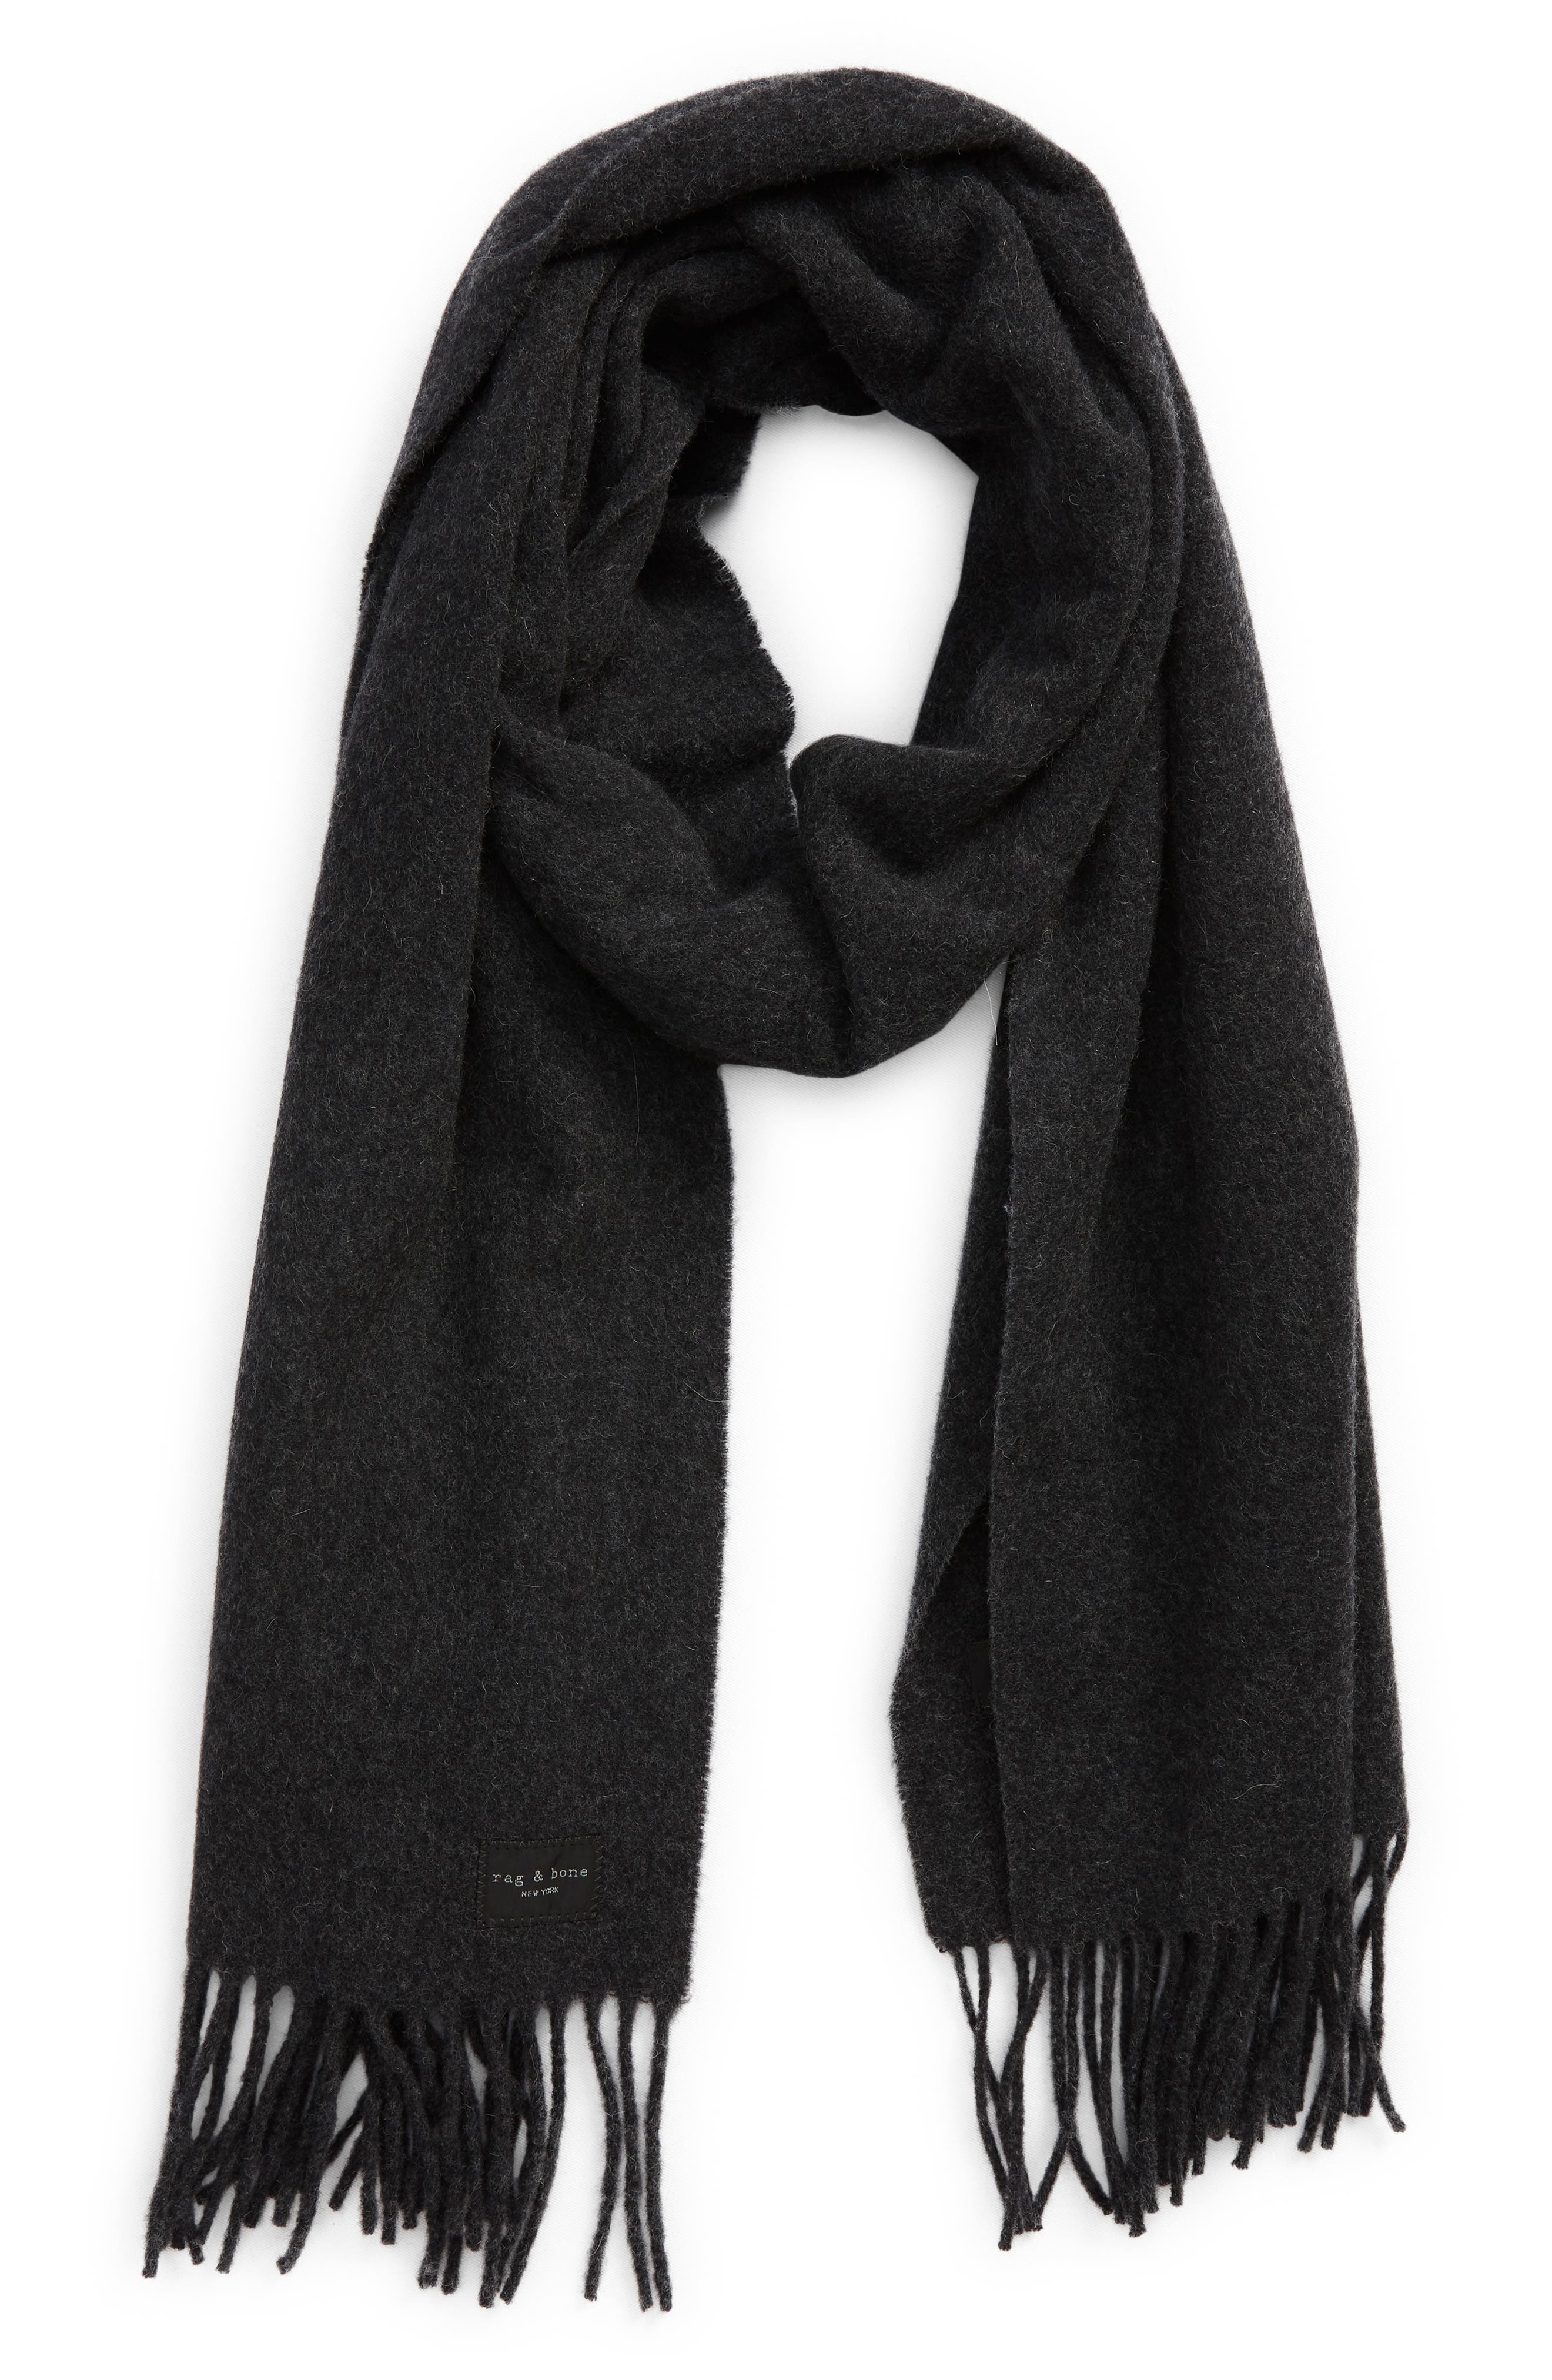 rag & bone Addison Skinny Recycled Wool Blend Scarf in Charcoal at Nordstrom